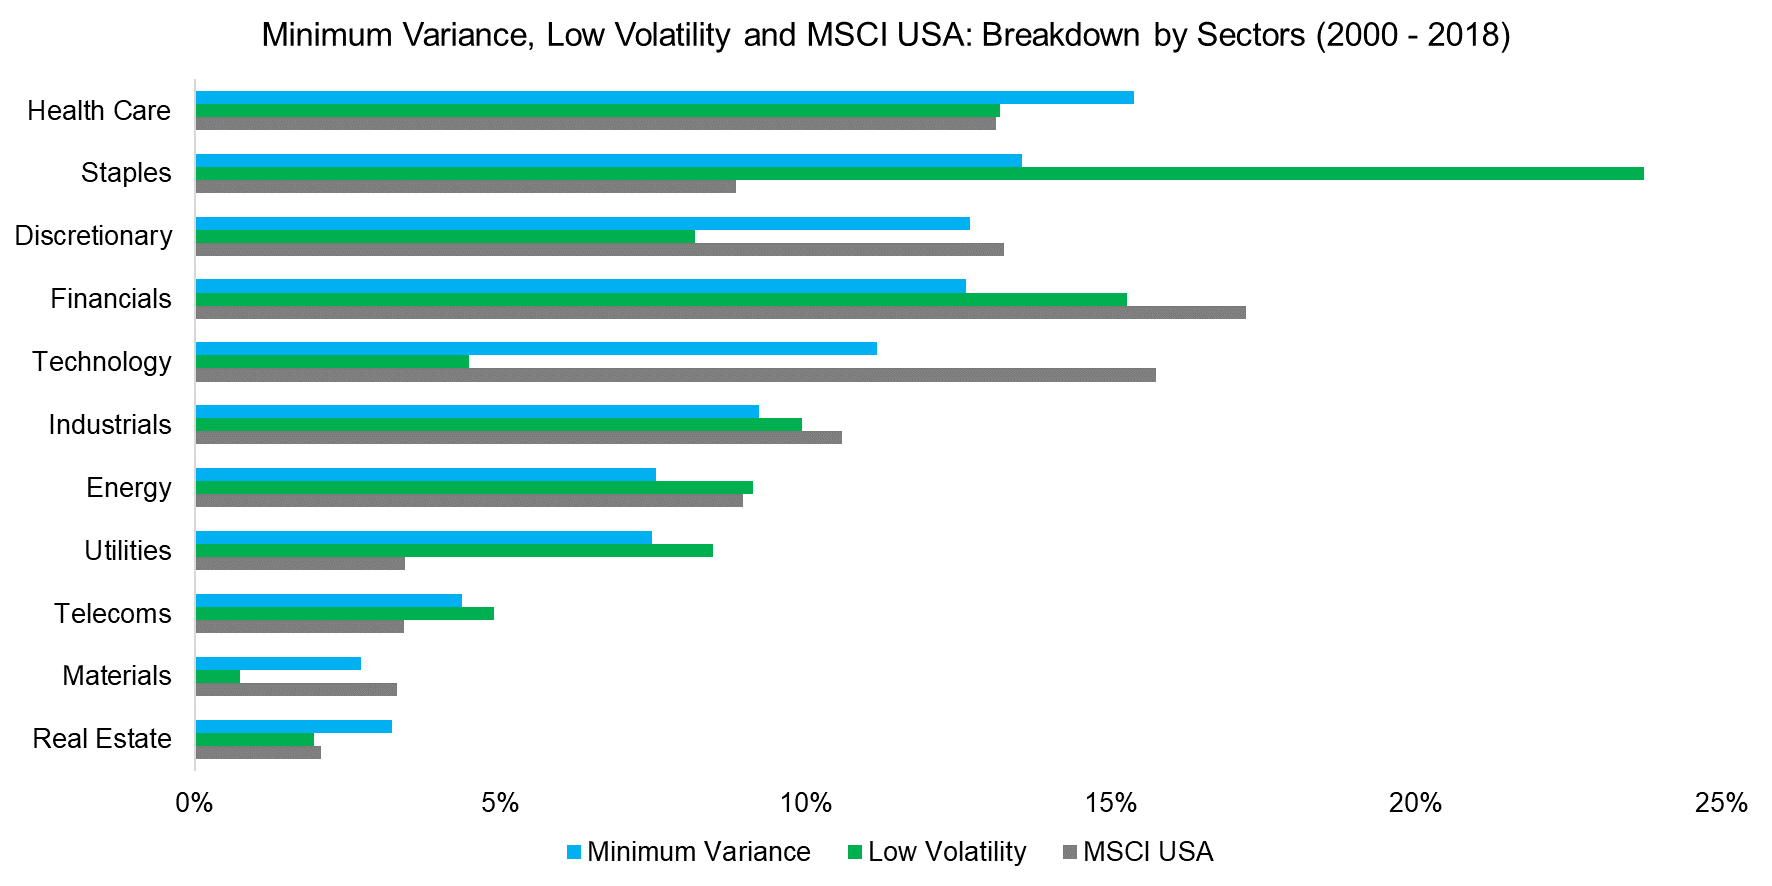 Minimum Variance, Low Volatility and MSCI USA Breakdown by Sectors (2000 - 2018)